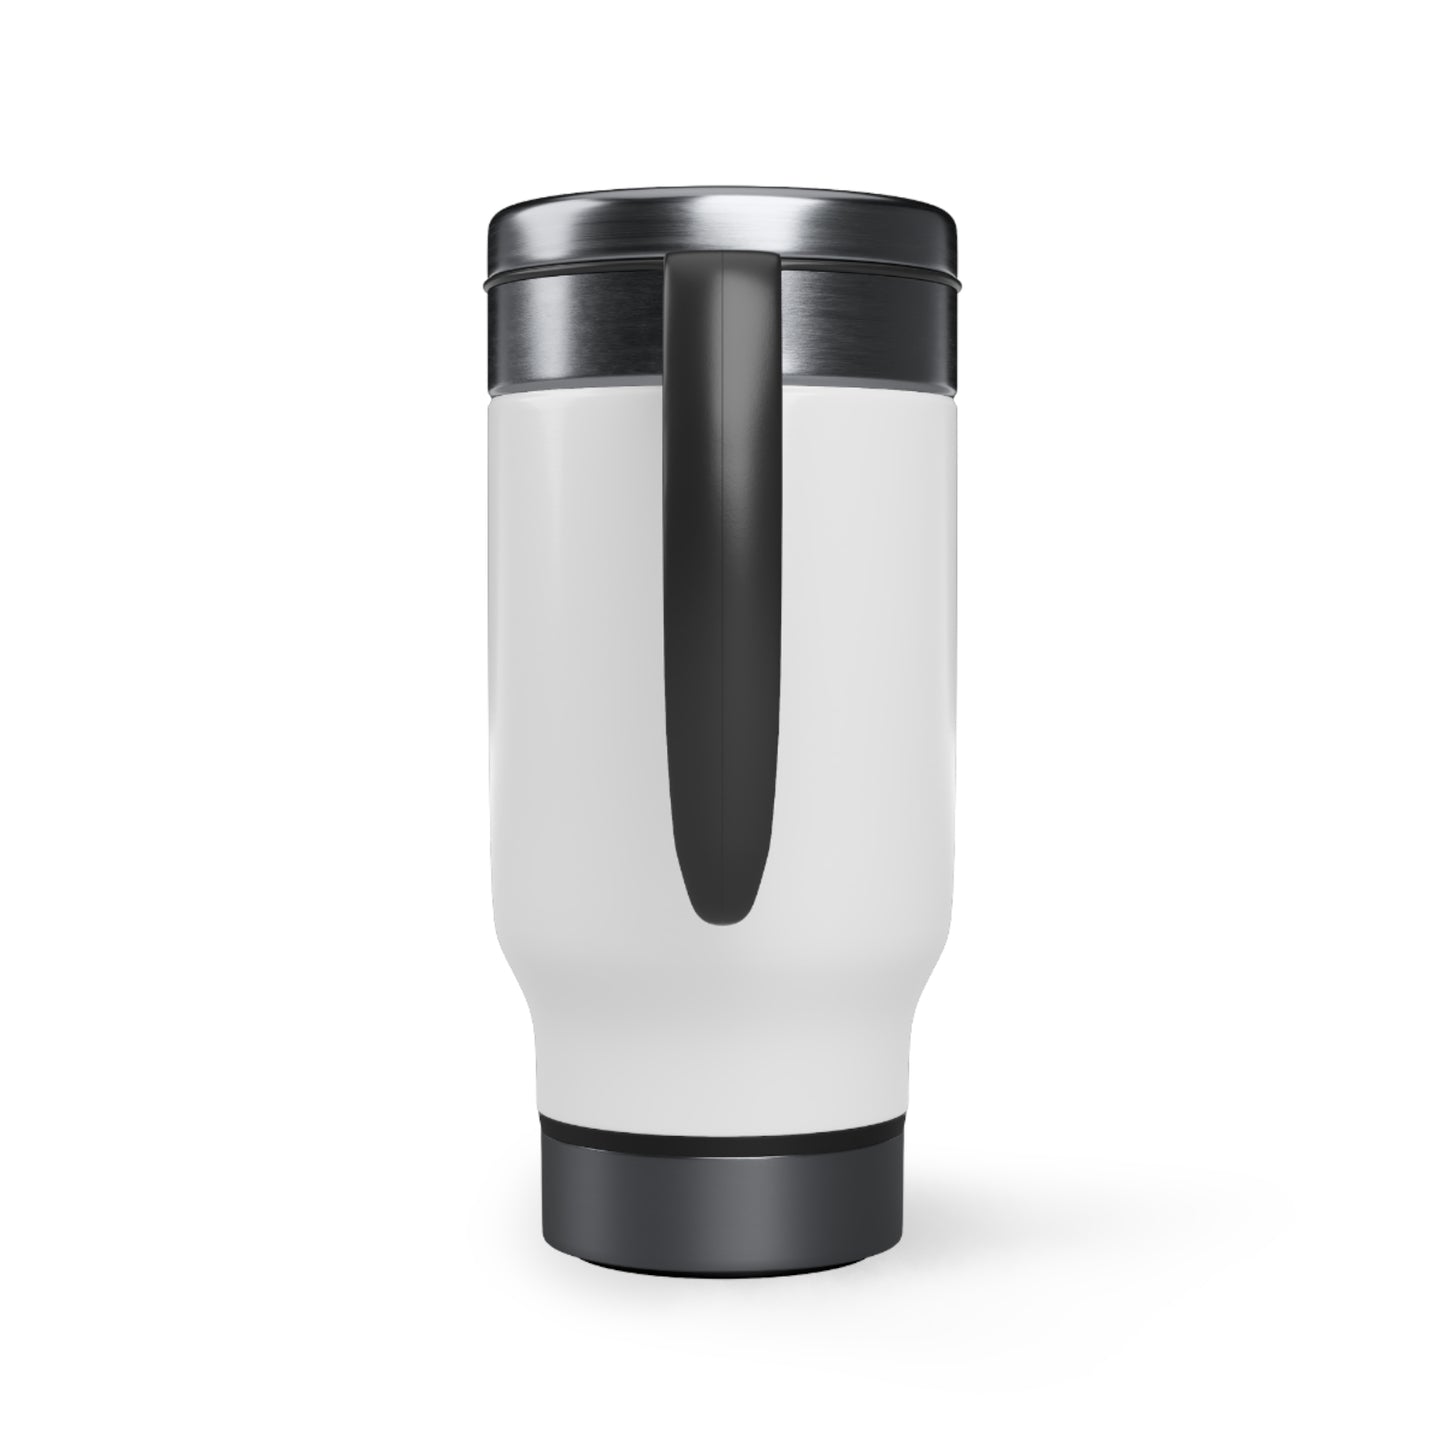 PEACE Stainless Steel Travel Mug with Handle, 14oz